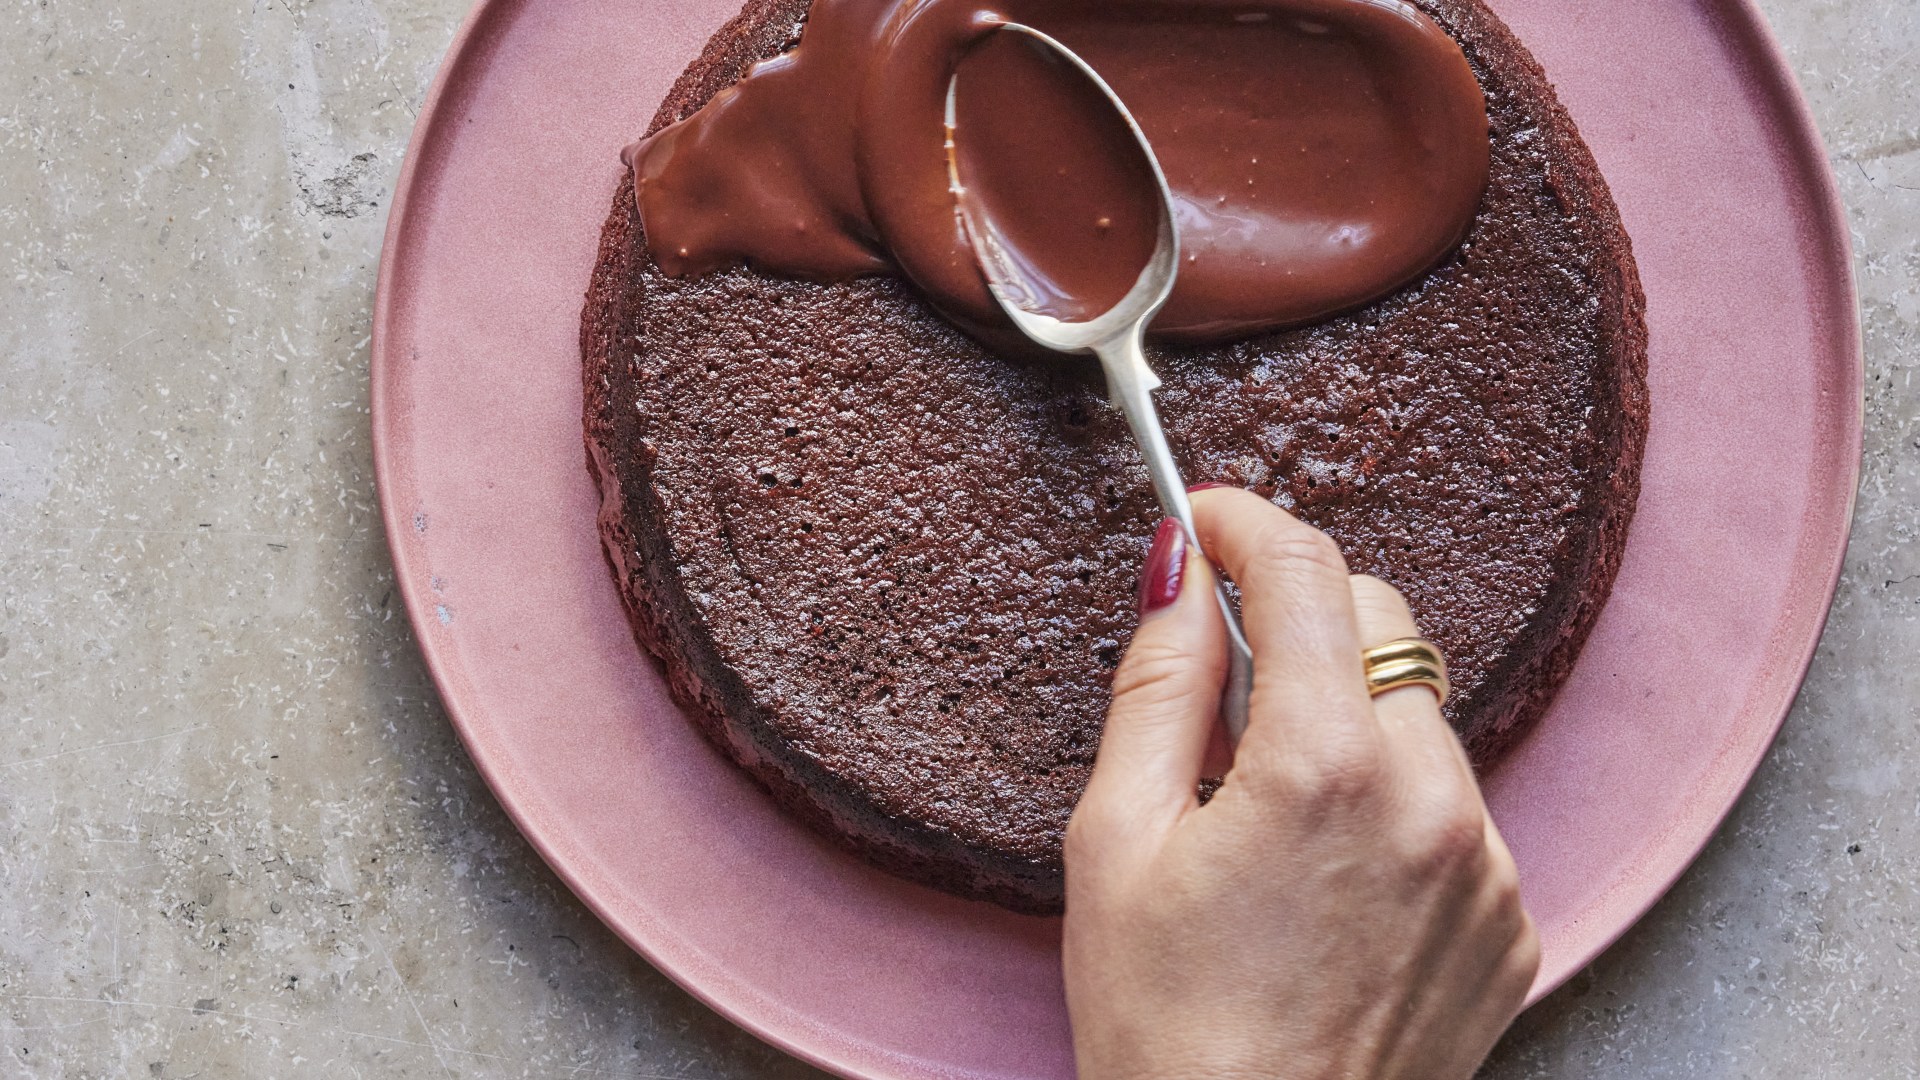 The 3 nutritionist-approved recipes to try this weekend – including a healthy chocolate cake [Video]